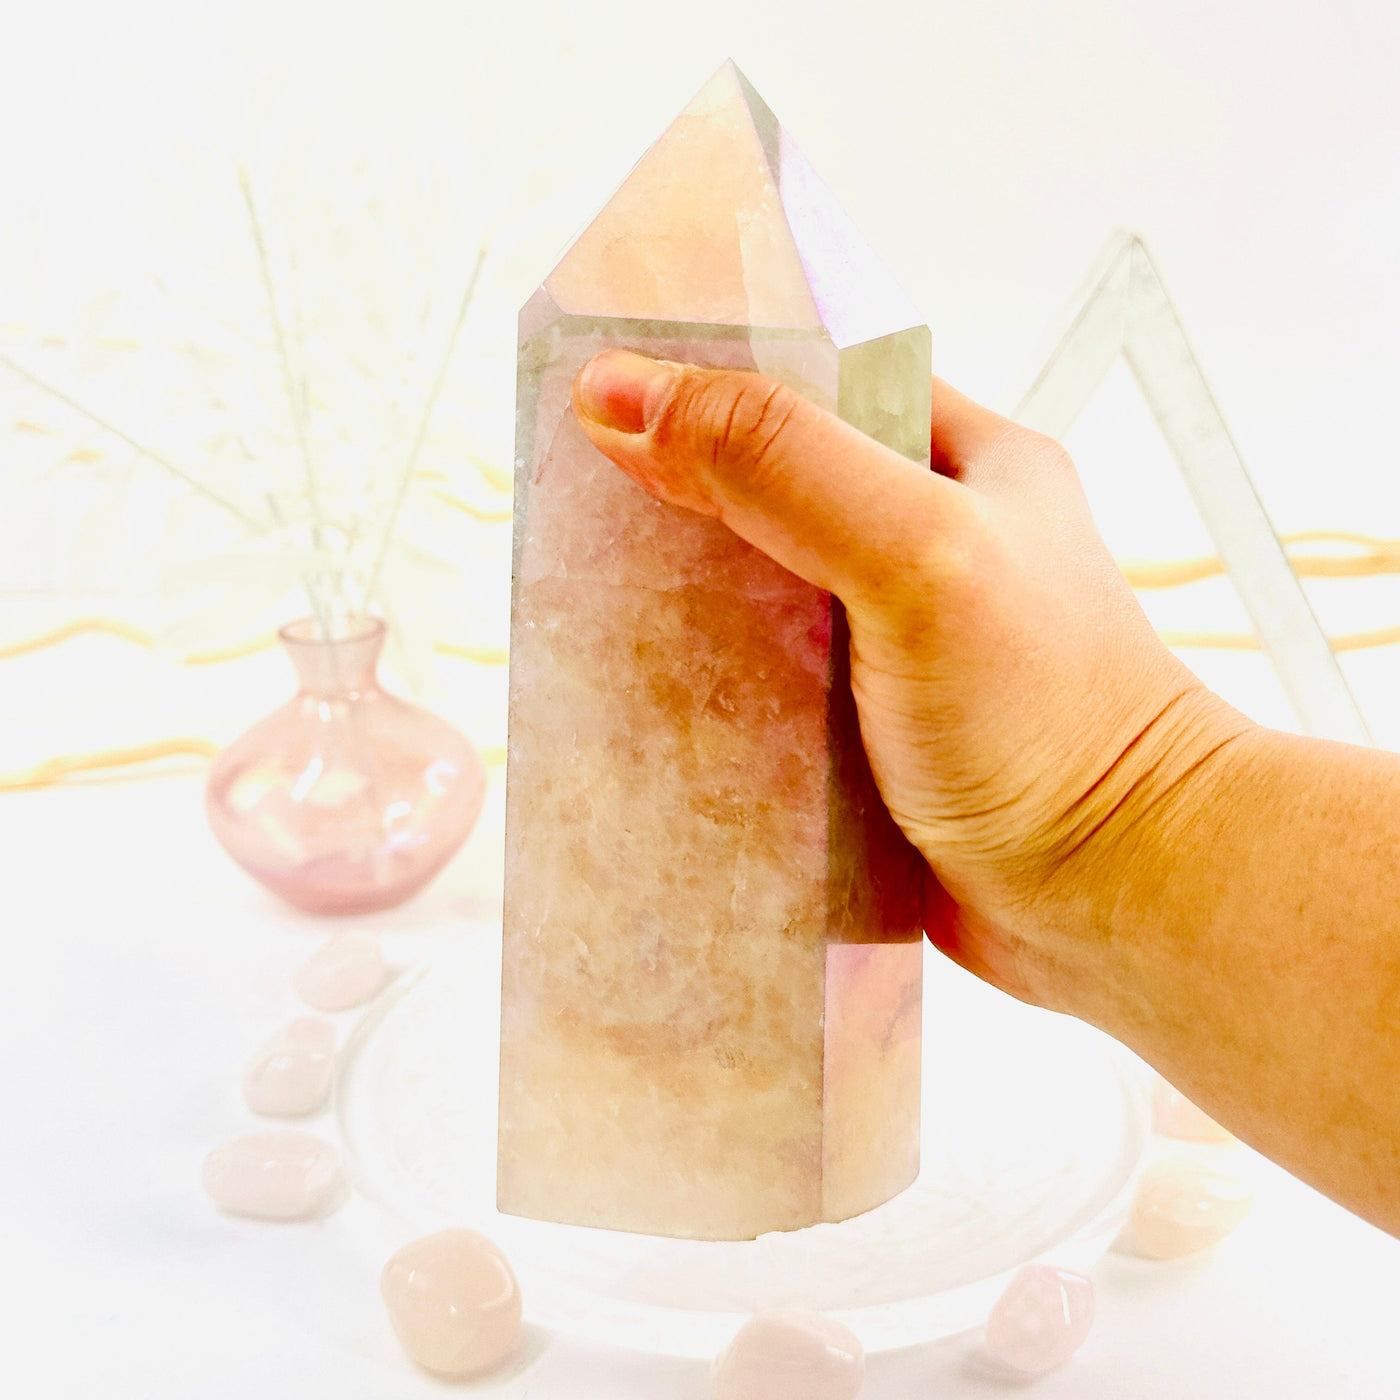 Angel Aura Rose Quartz Polished Point with Natural Inclusions in hand for size reference